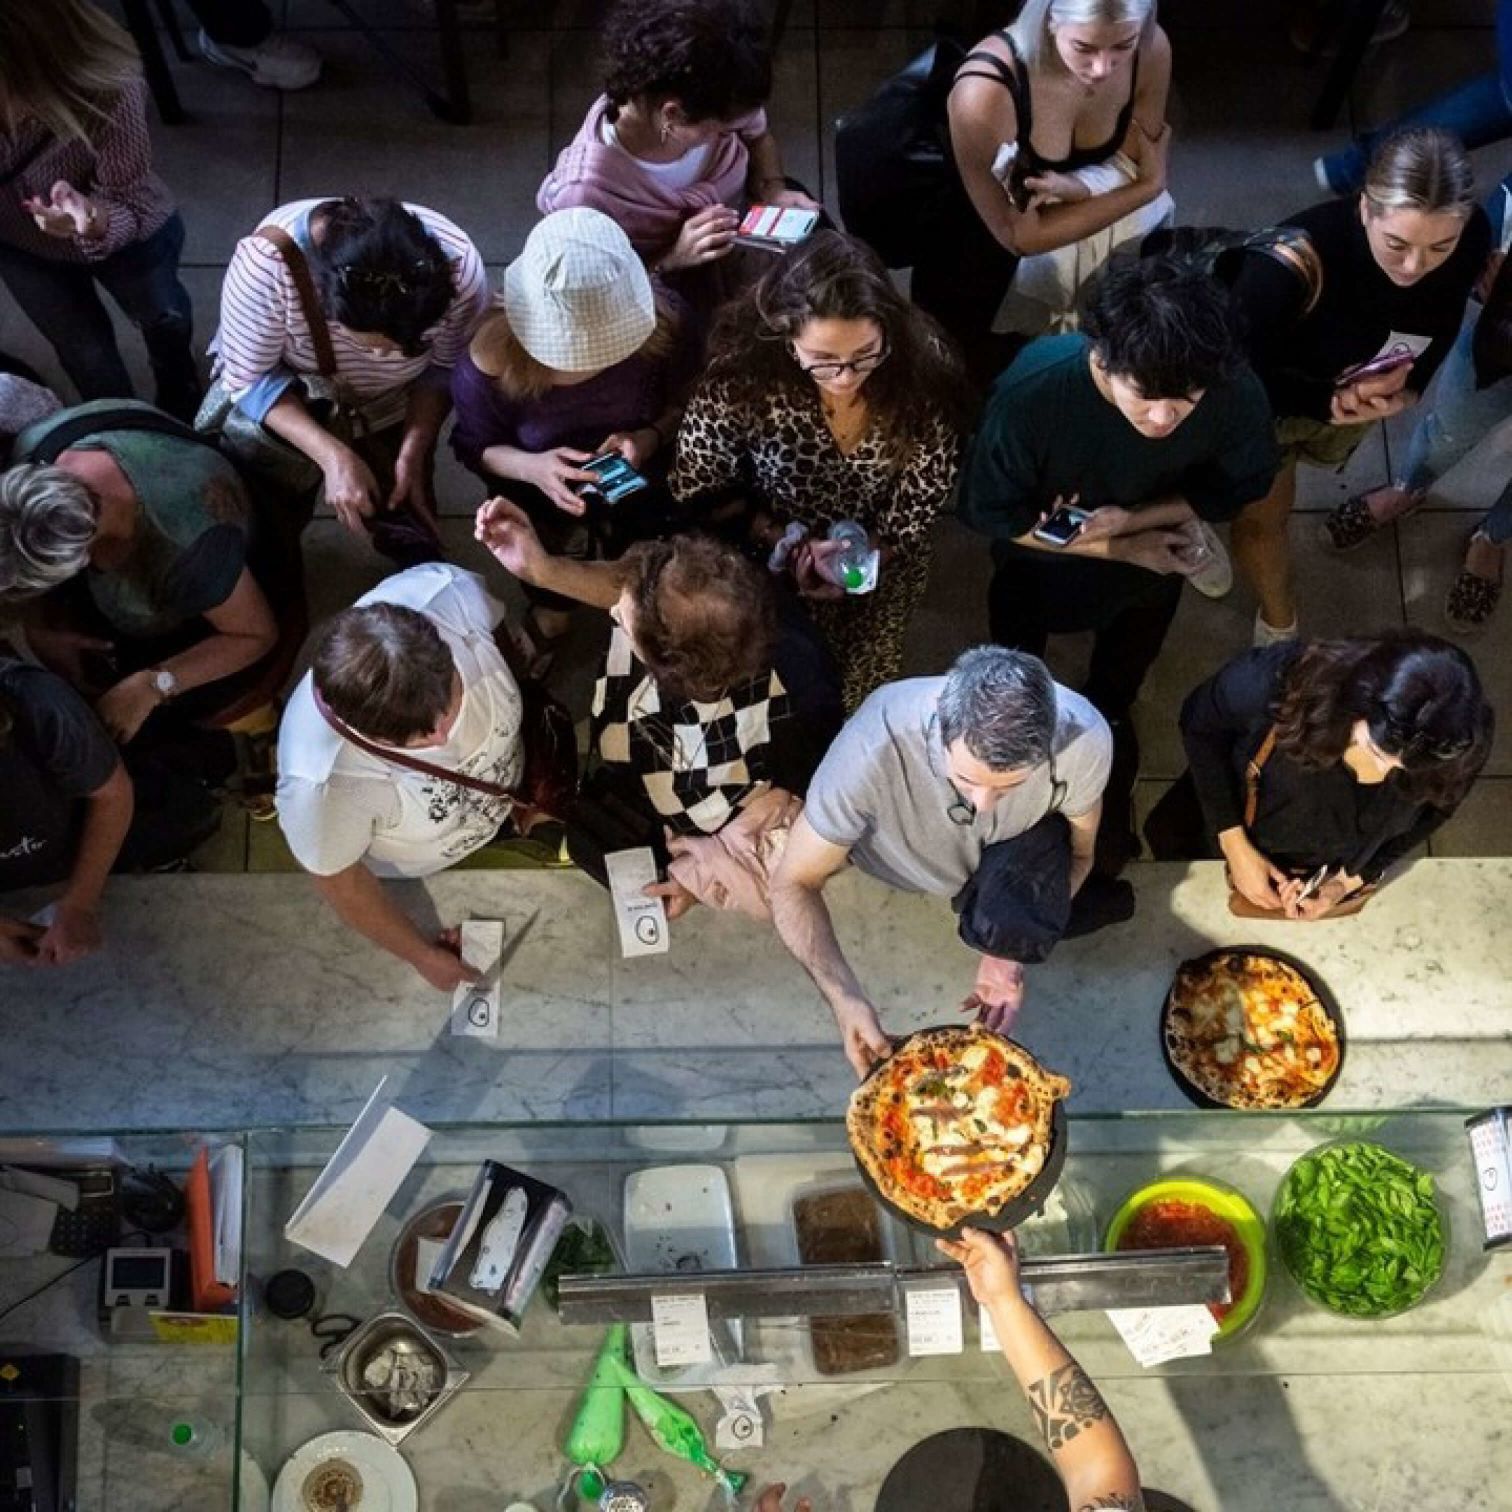 A Group Of People Kneeling On The Ground With Food On Them